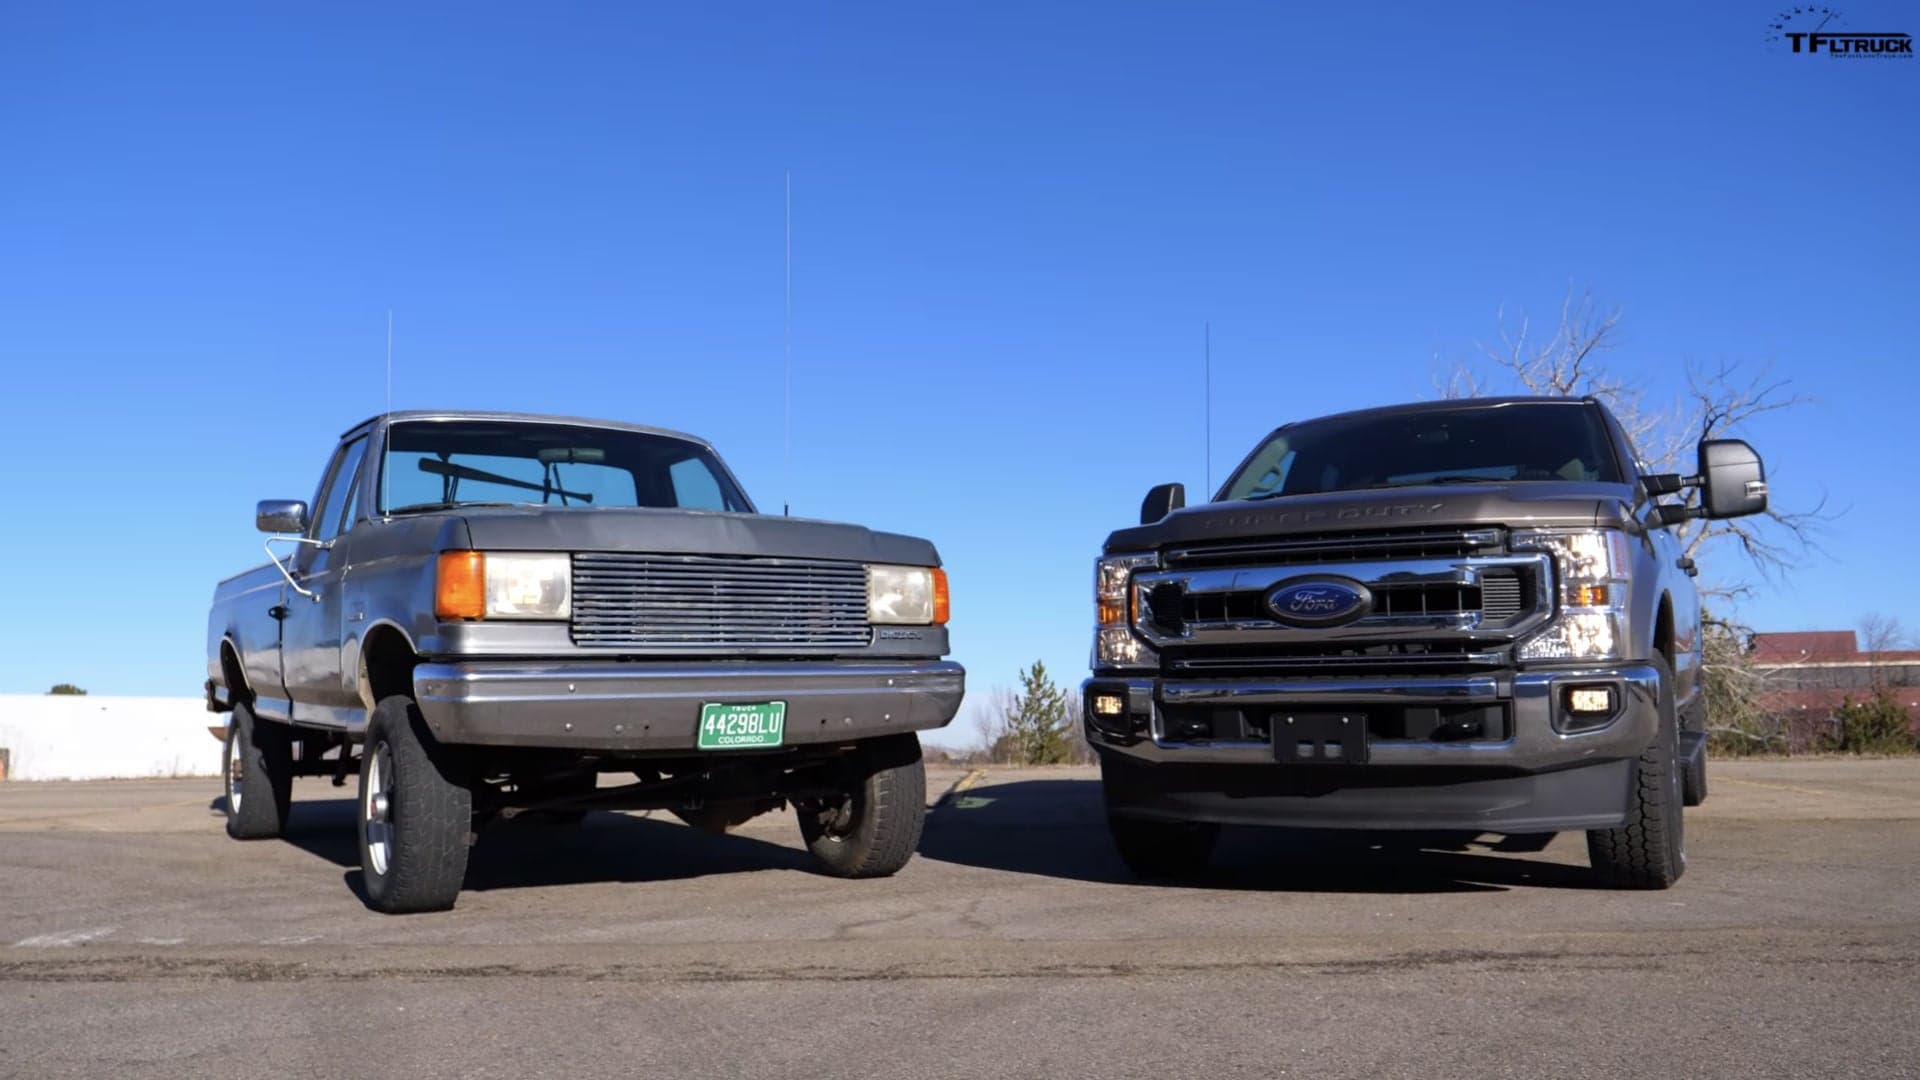 Here’s How a New 7.3-L Ford Super Duty Pickup Compares to One From 30 Years Ago